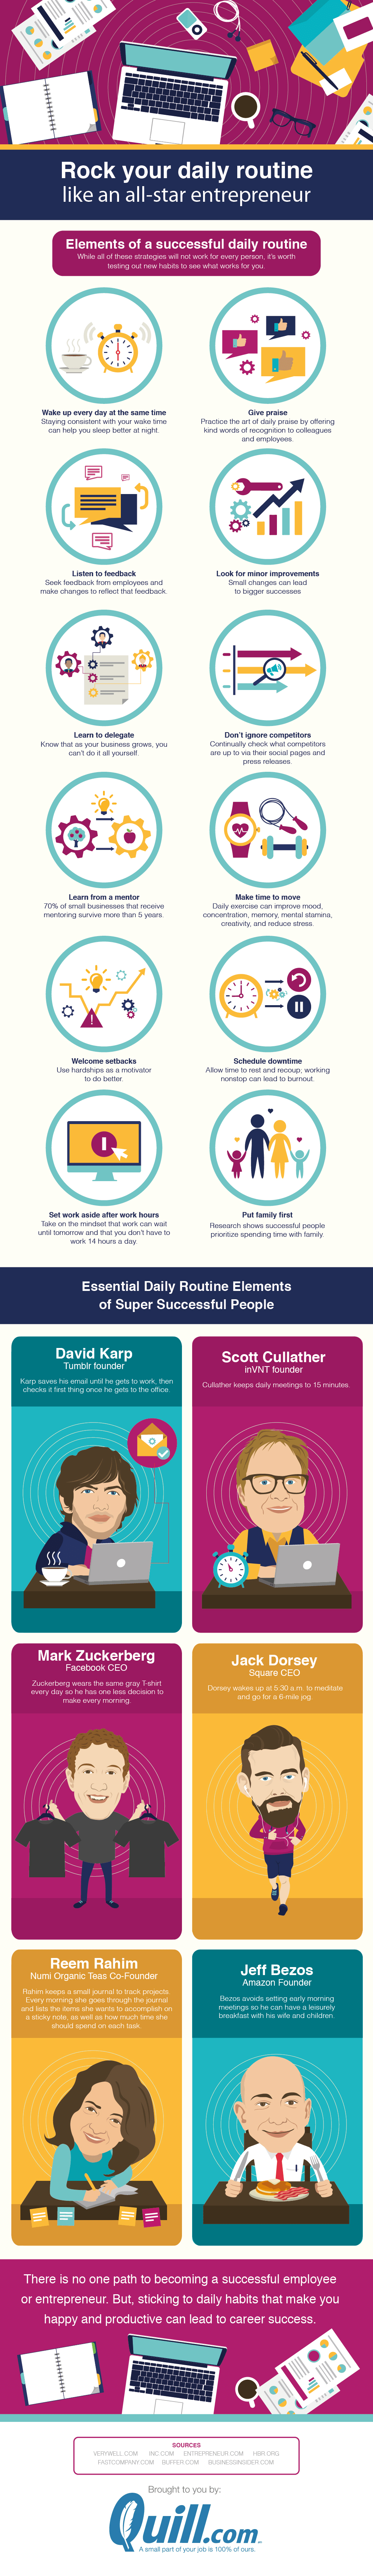 Transform Your Daily Routine Into That Of An All-Star Entrepreneur - Infographic